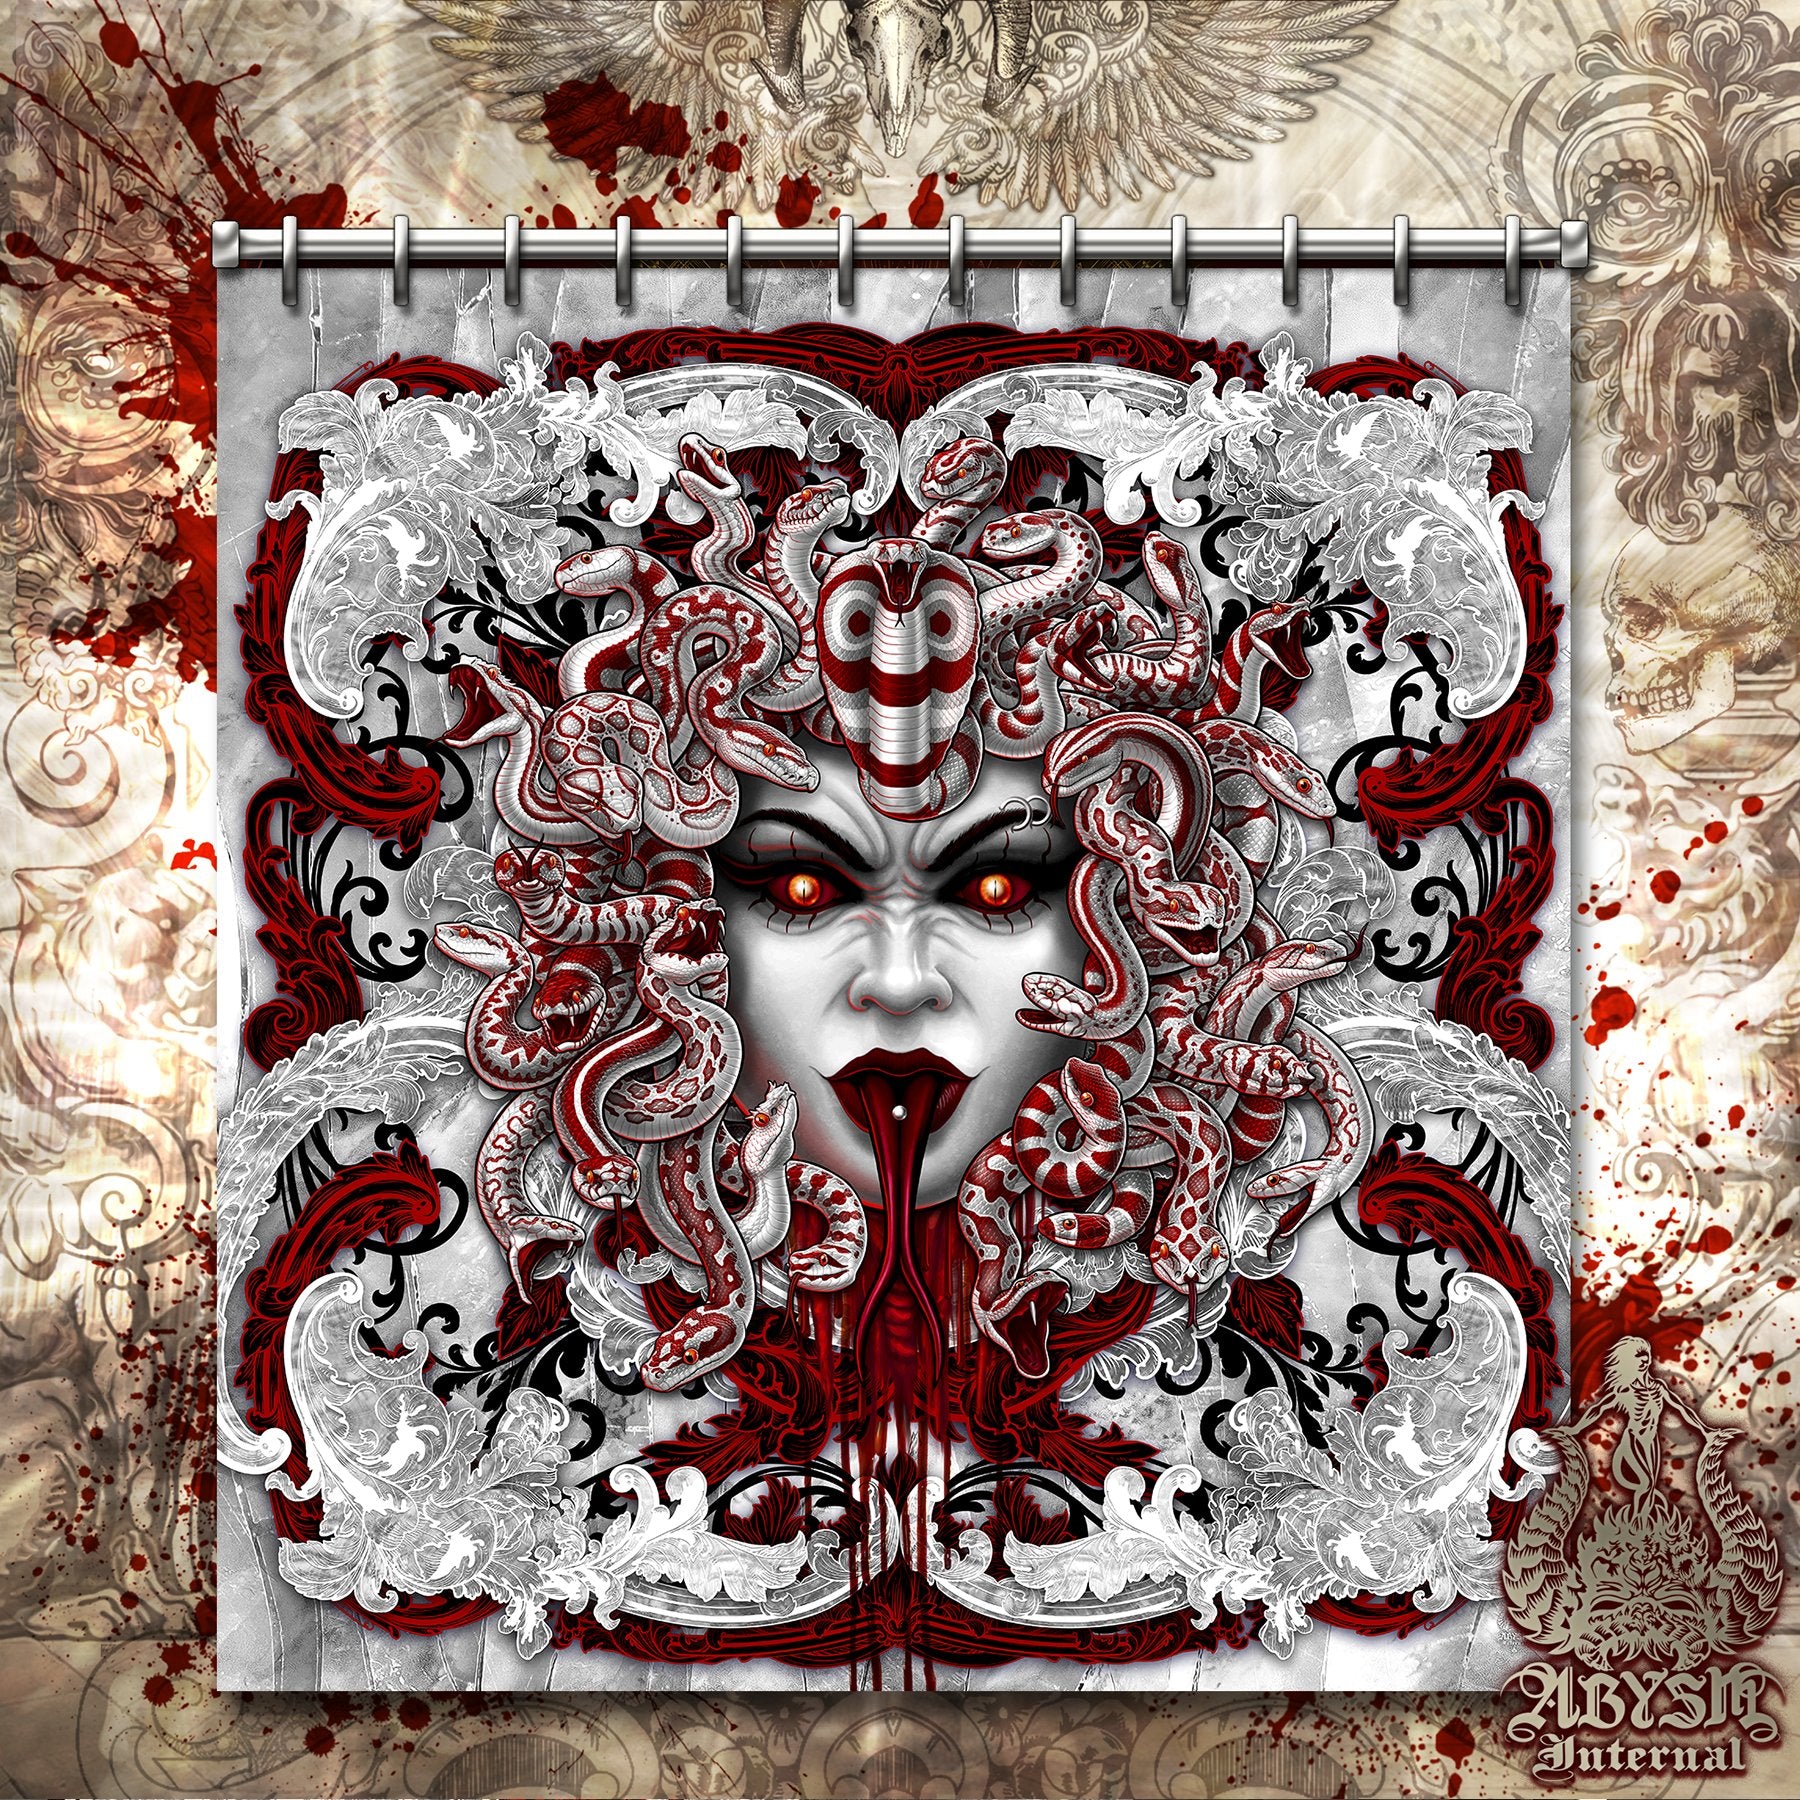 Skull Shower Curtain, 71x74 inches, Gothic Bathroom Decor, White Goth - Bloody Red Medusa, 4 Faces - Abysm Internal